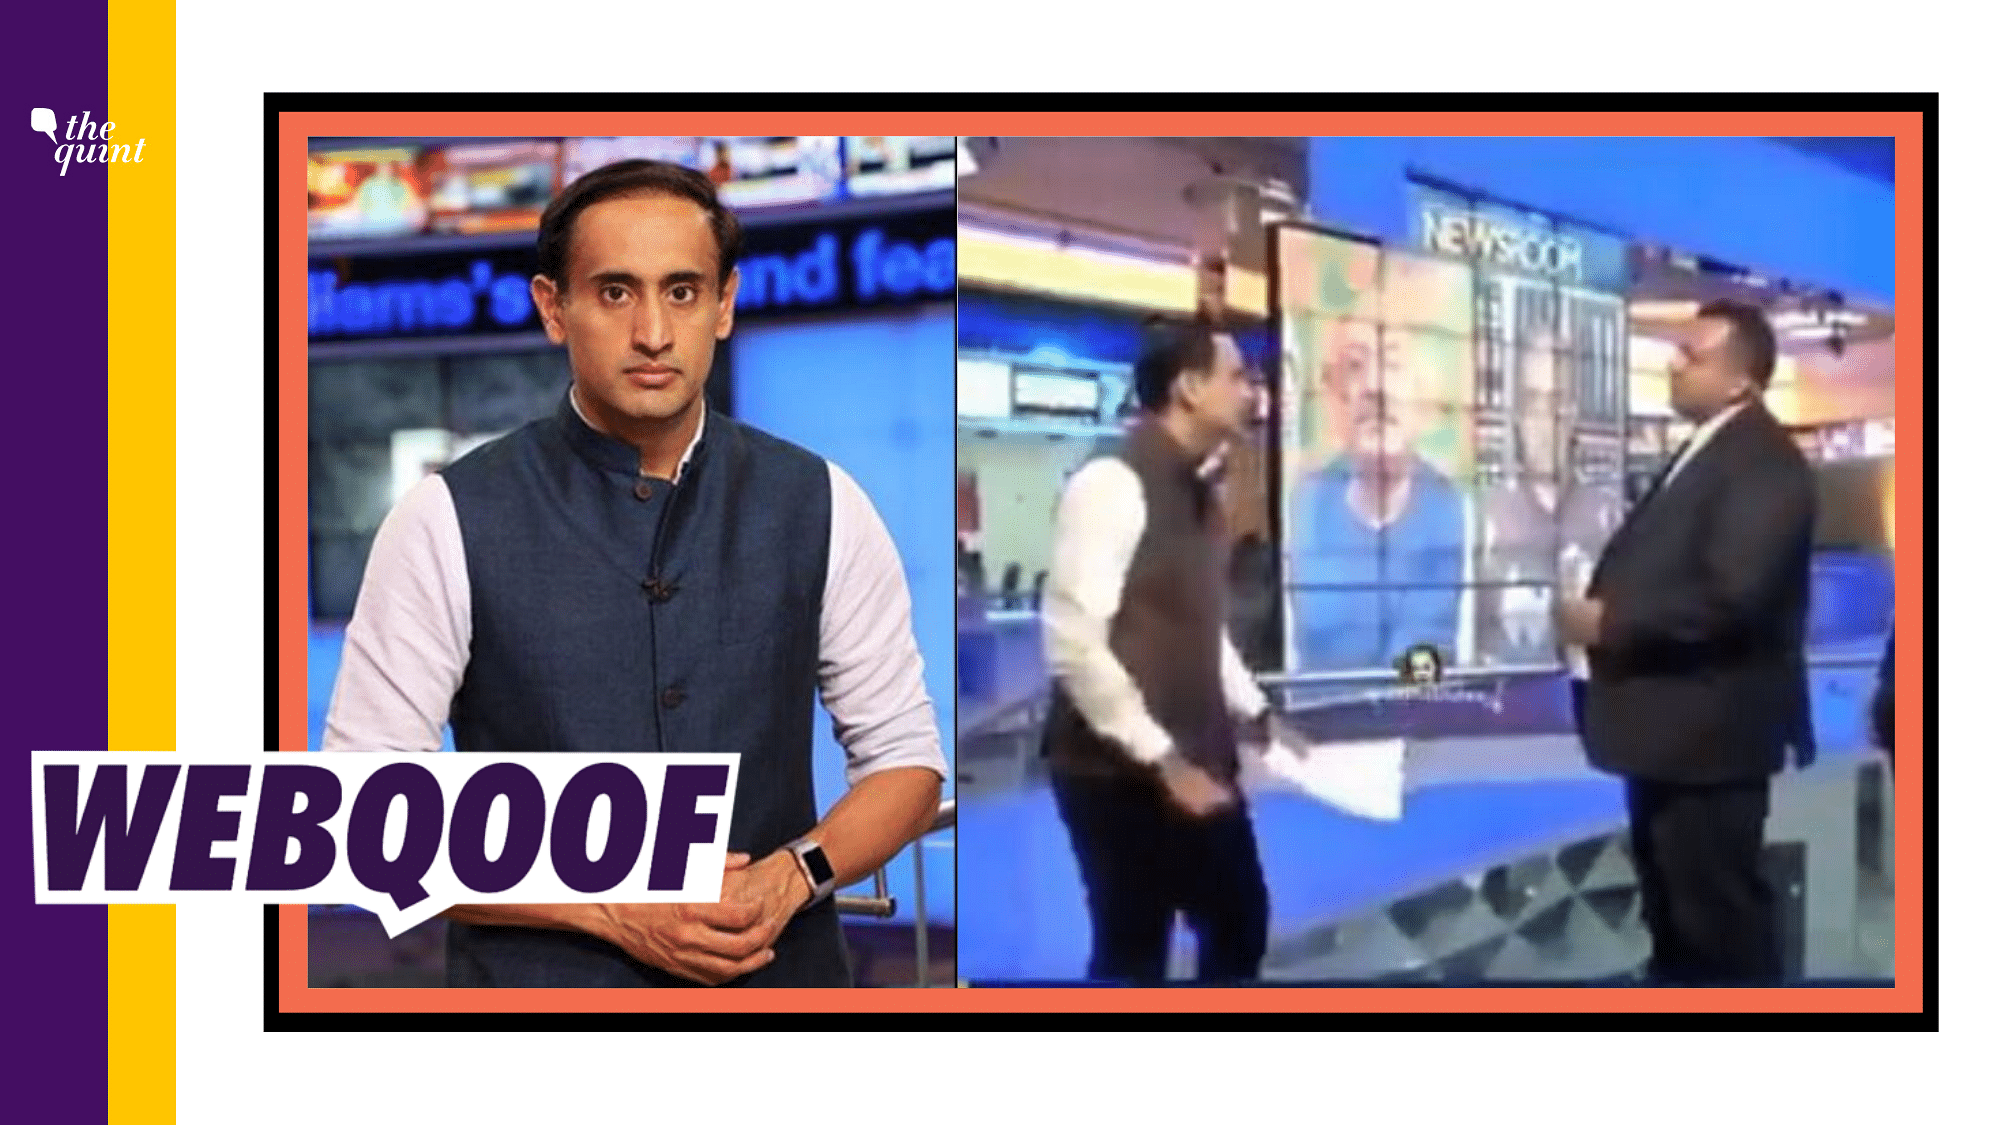 A clip showing Rahul Kanwal saying, “Chanting Vande Mataram is an anti-national activity” is doing the rounds on social media.